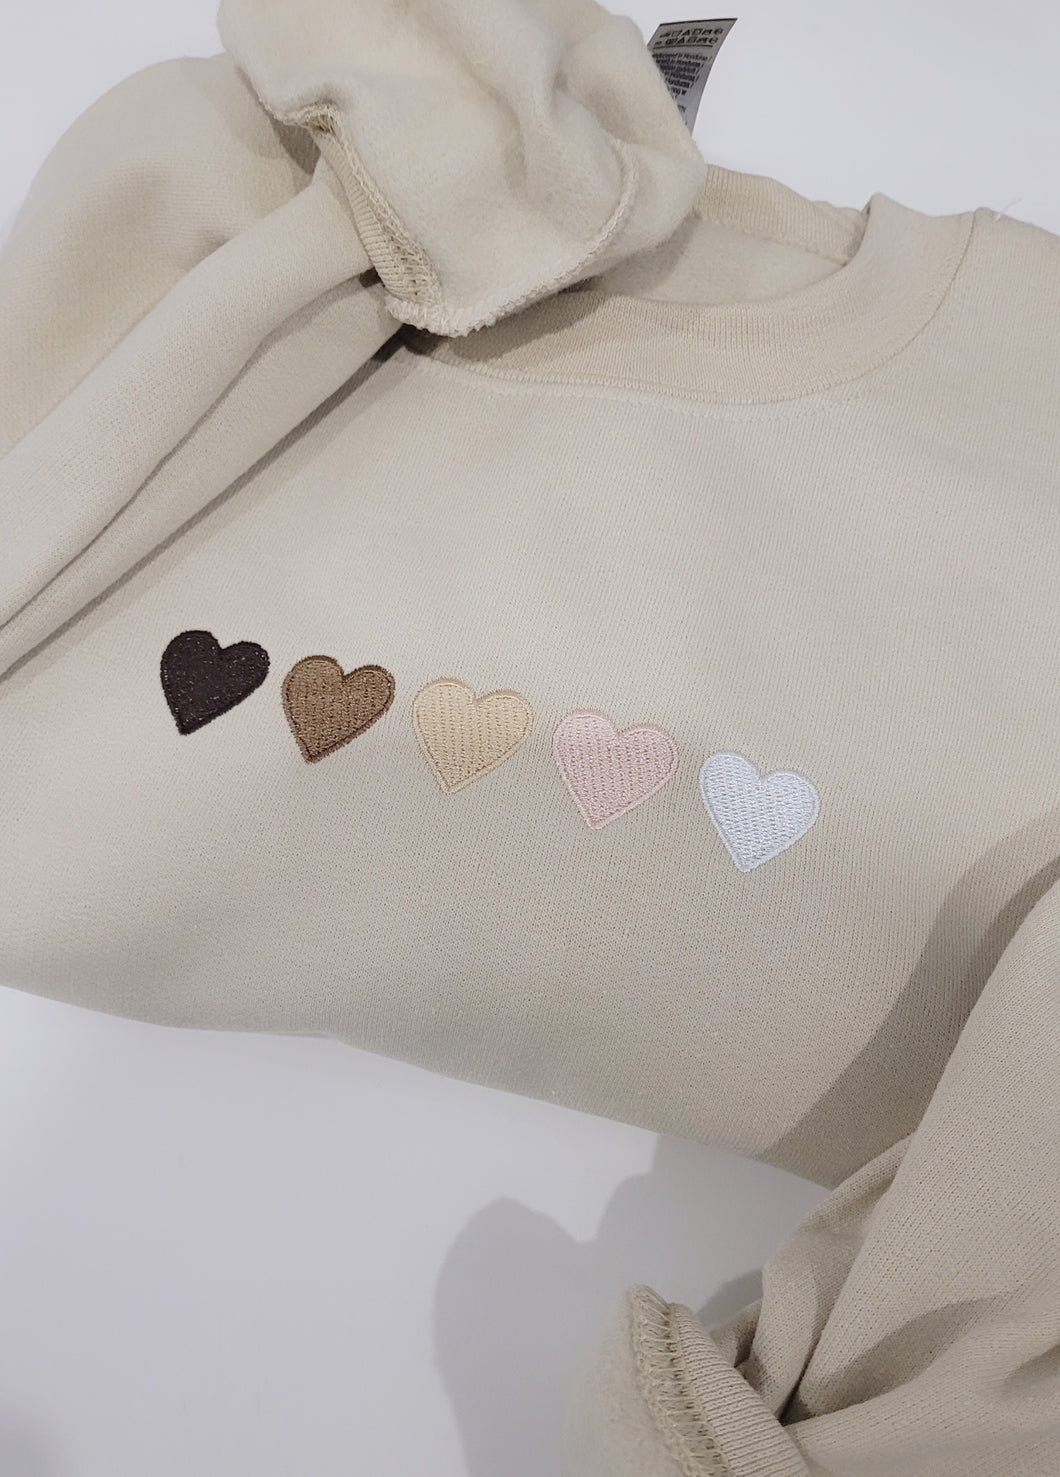 Ombré hearts - Embroidered Sweatshirt